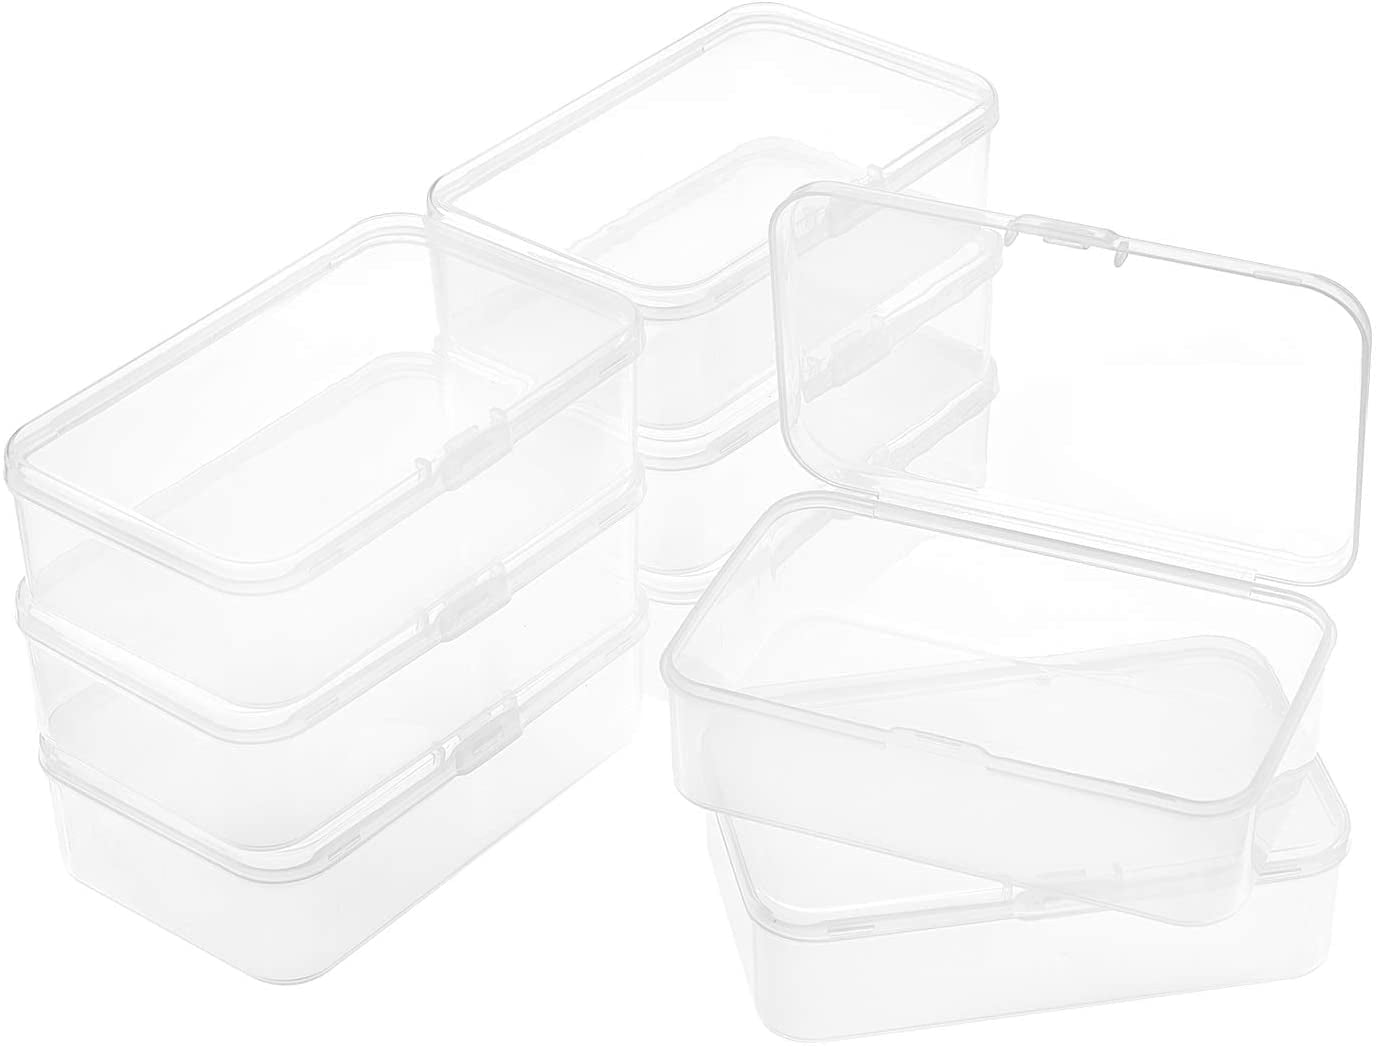 8 Pack Rectangular Clear Plastic Storage Containers Box with Hinged Lid for  Beads and Other Small Craft Items (6.5 x 3.74 x 1.18 inch)